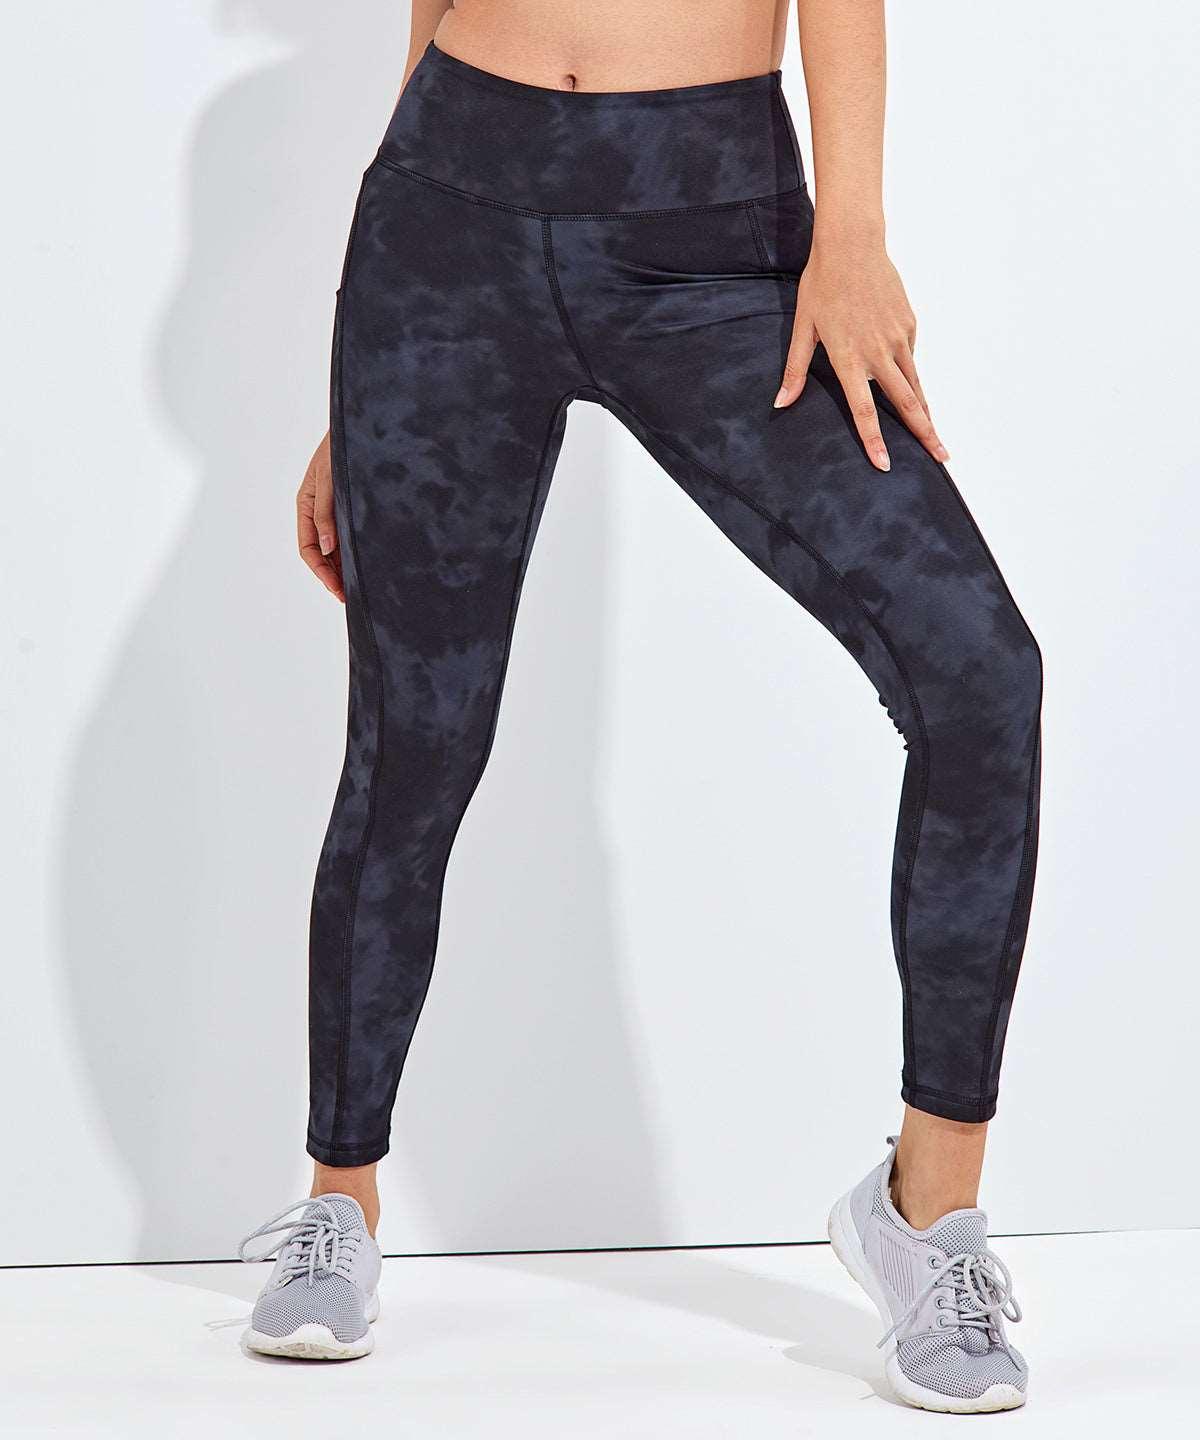 Acid Wash - Women's TriDri® recycled performance full length leggings Leggings TriDri® Activewear & Performance, Back to the Gym, Exclusives, Leggings, New Styles For 2022, Organic & Conscious, Women's Fashion Schoolwear Centres